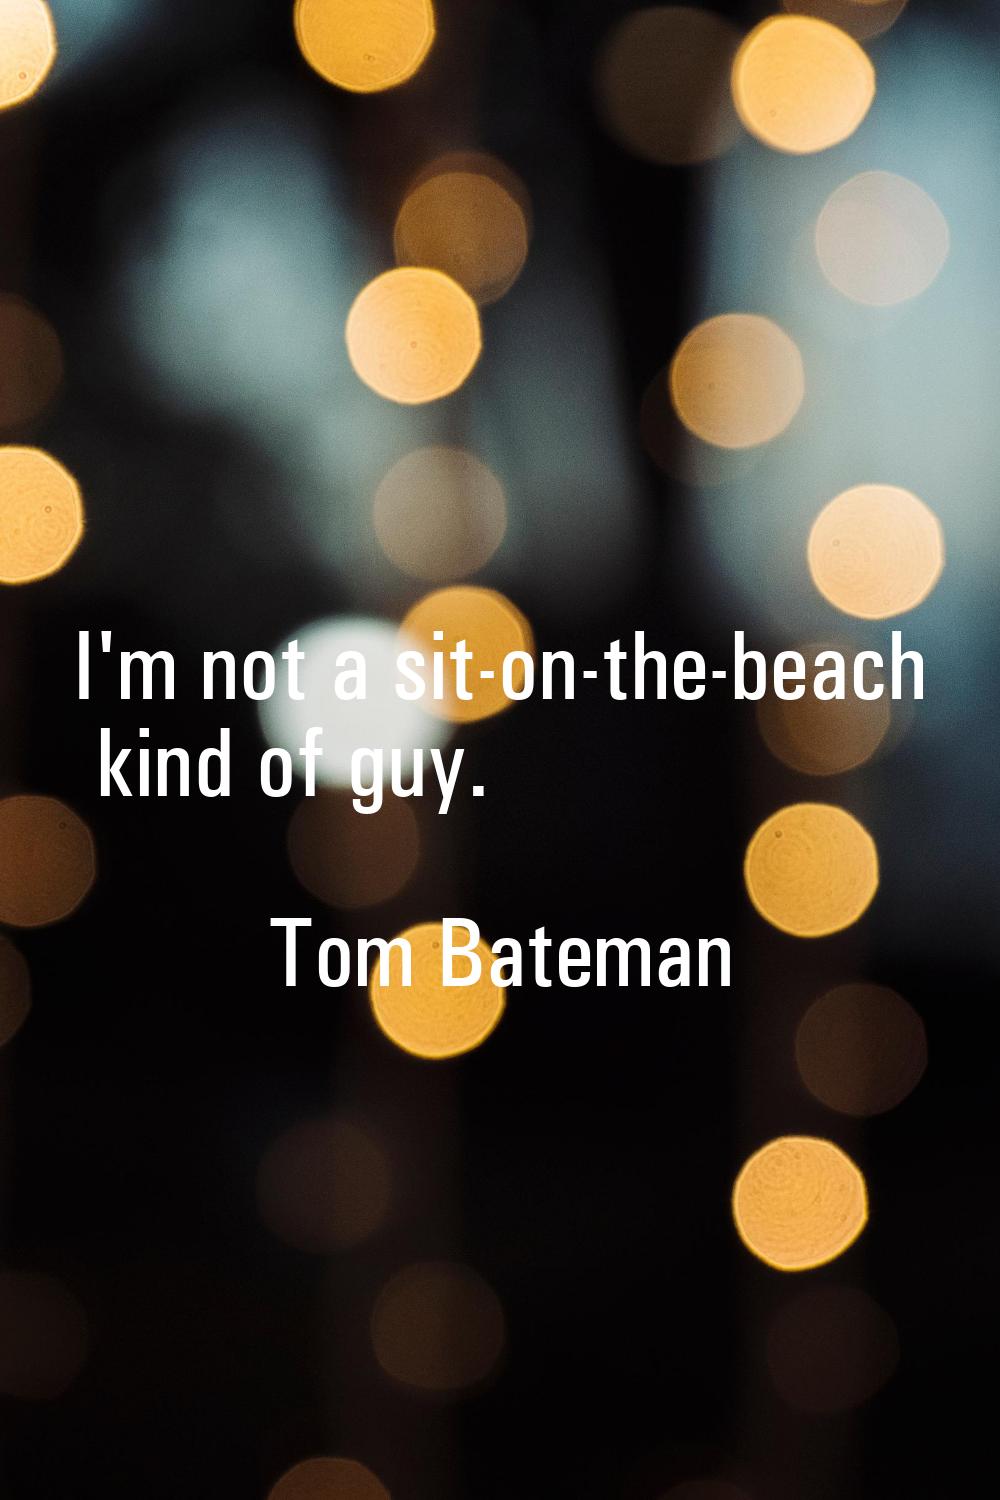 I'm not a sit-on-the-beach kind of guy.